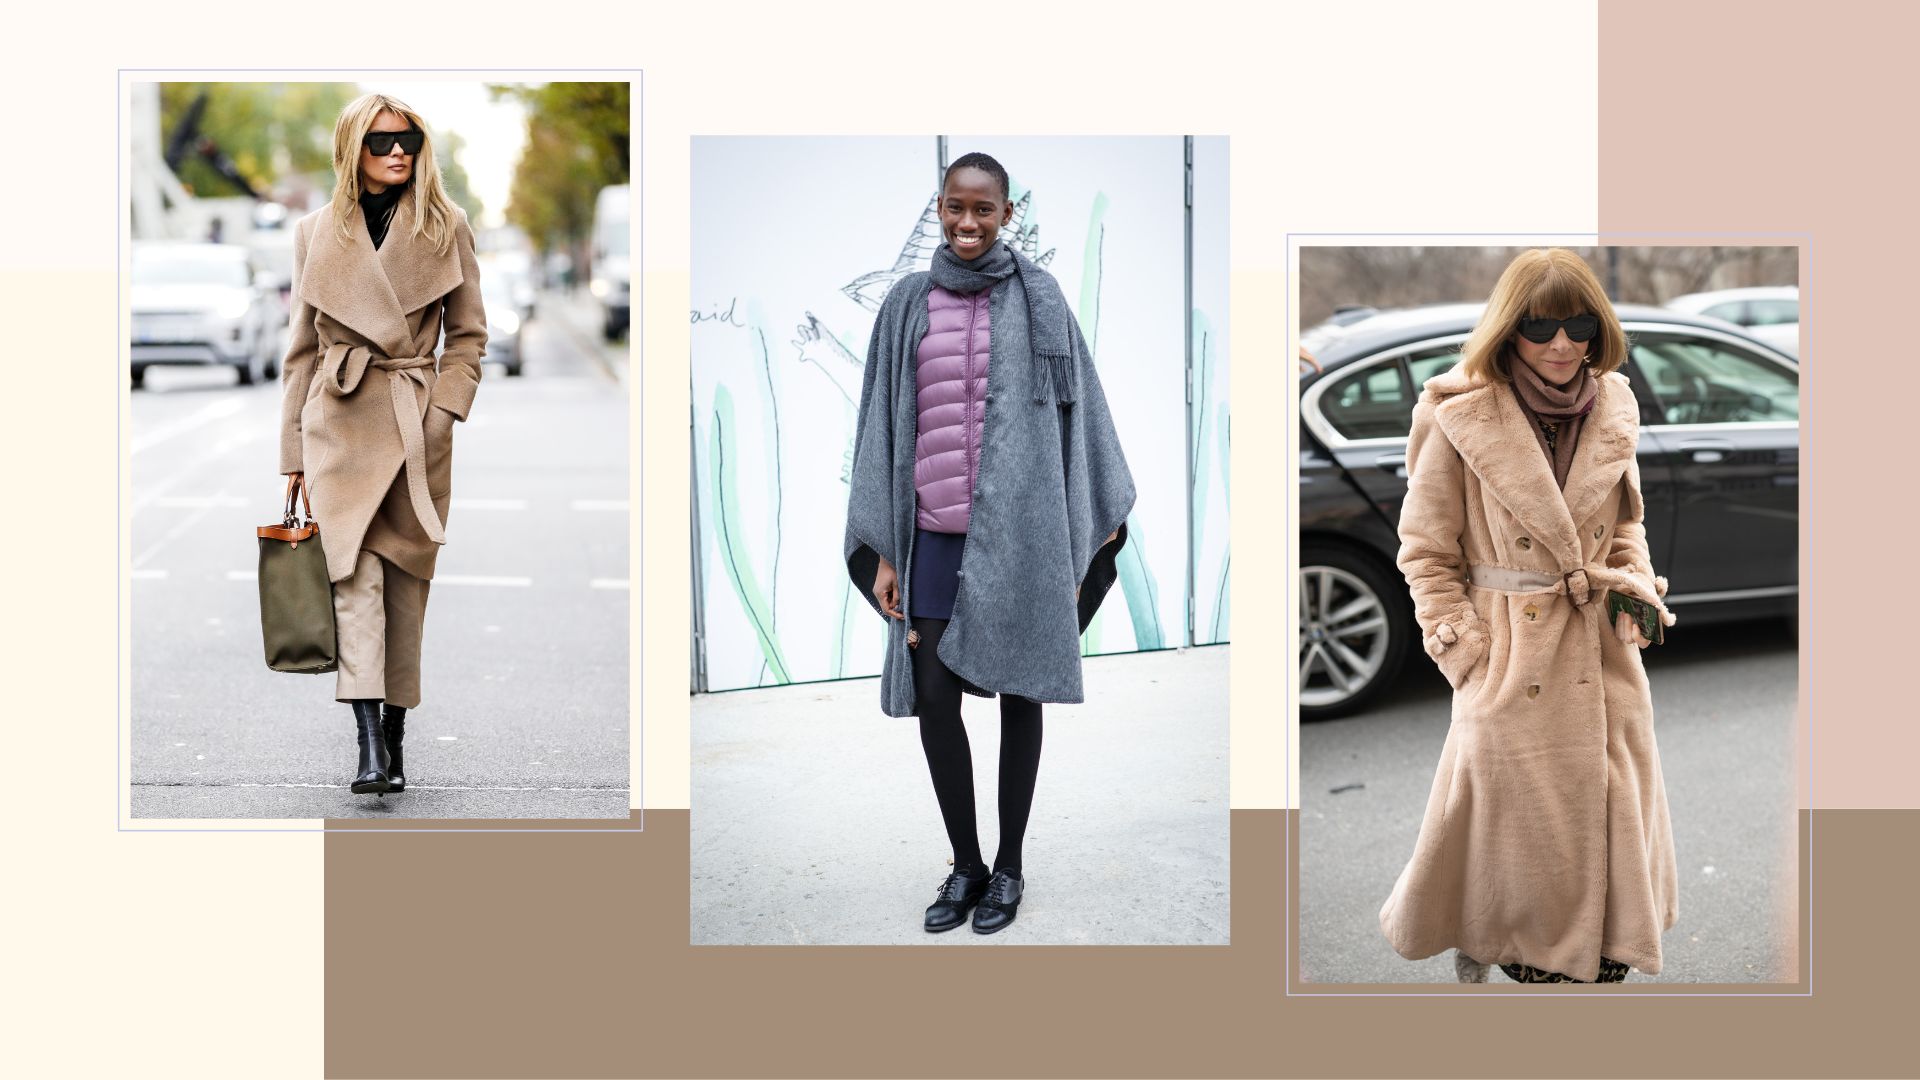 Our Fashion Editor loves this Zara coat